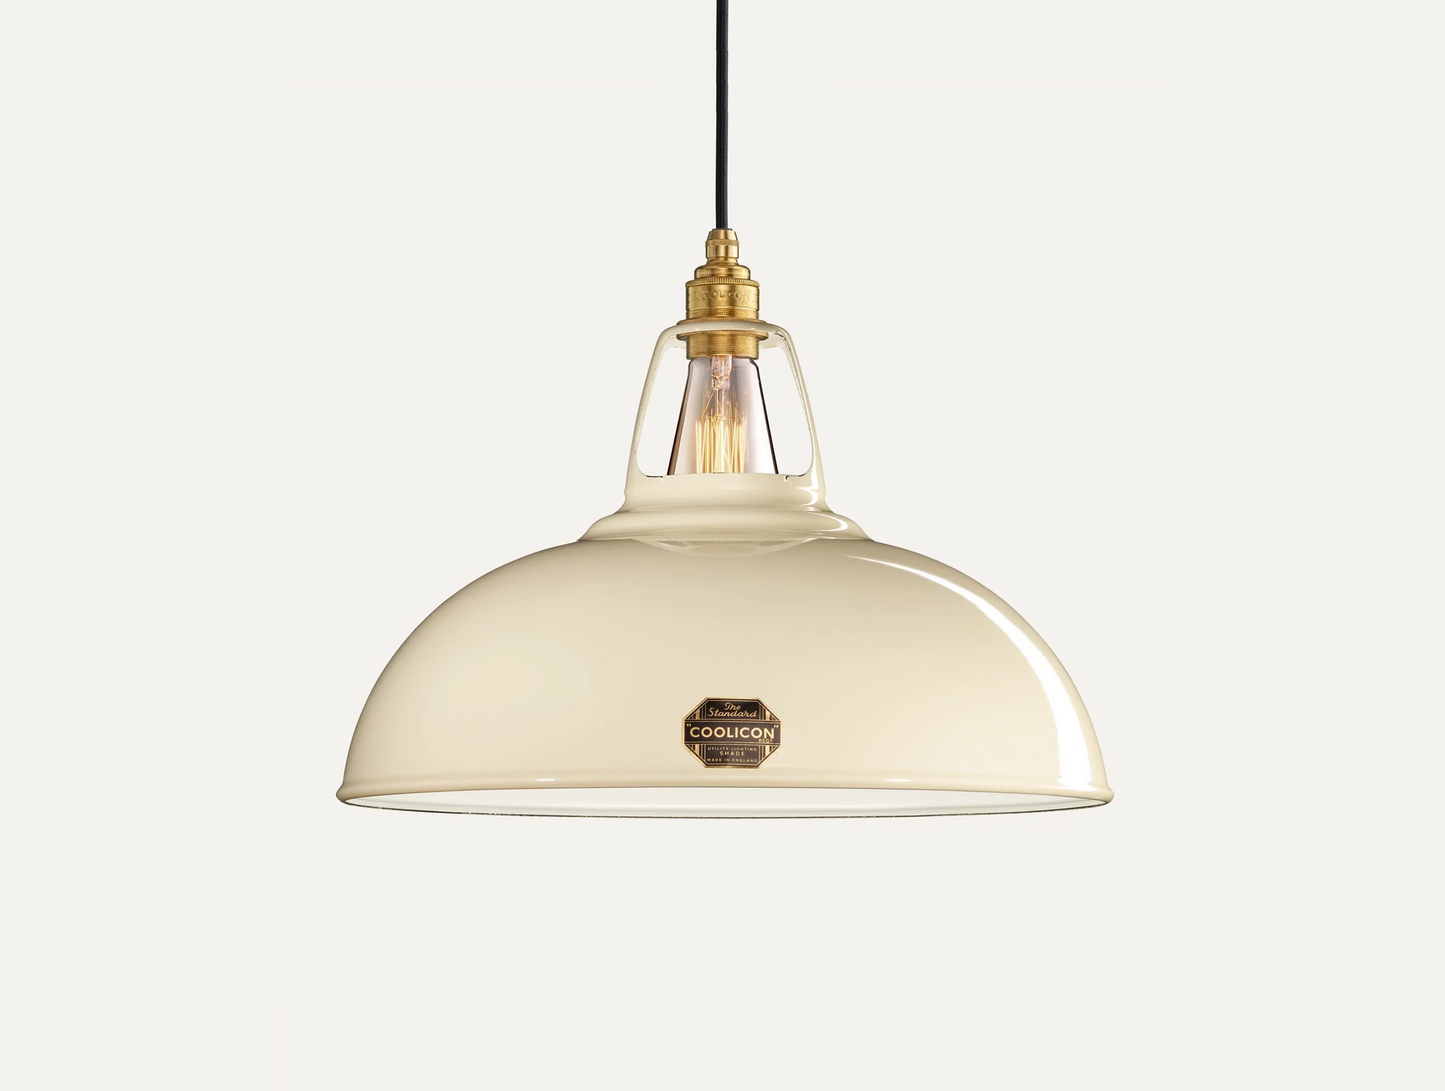 Large Classic Cream Coolicon lampshade with a black Industrial pendant set over a light cream background